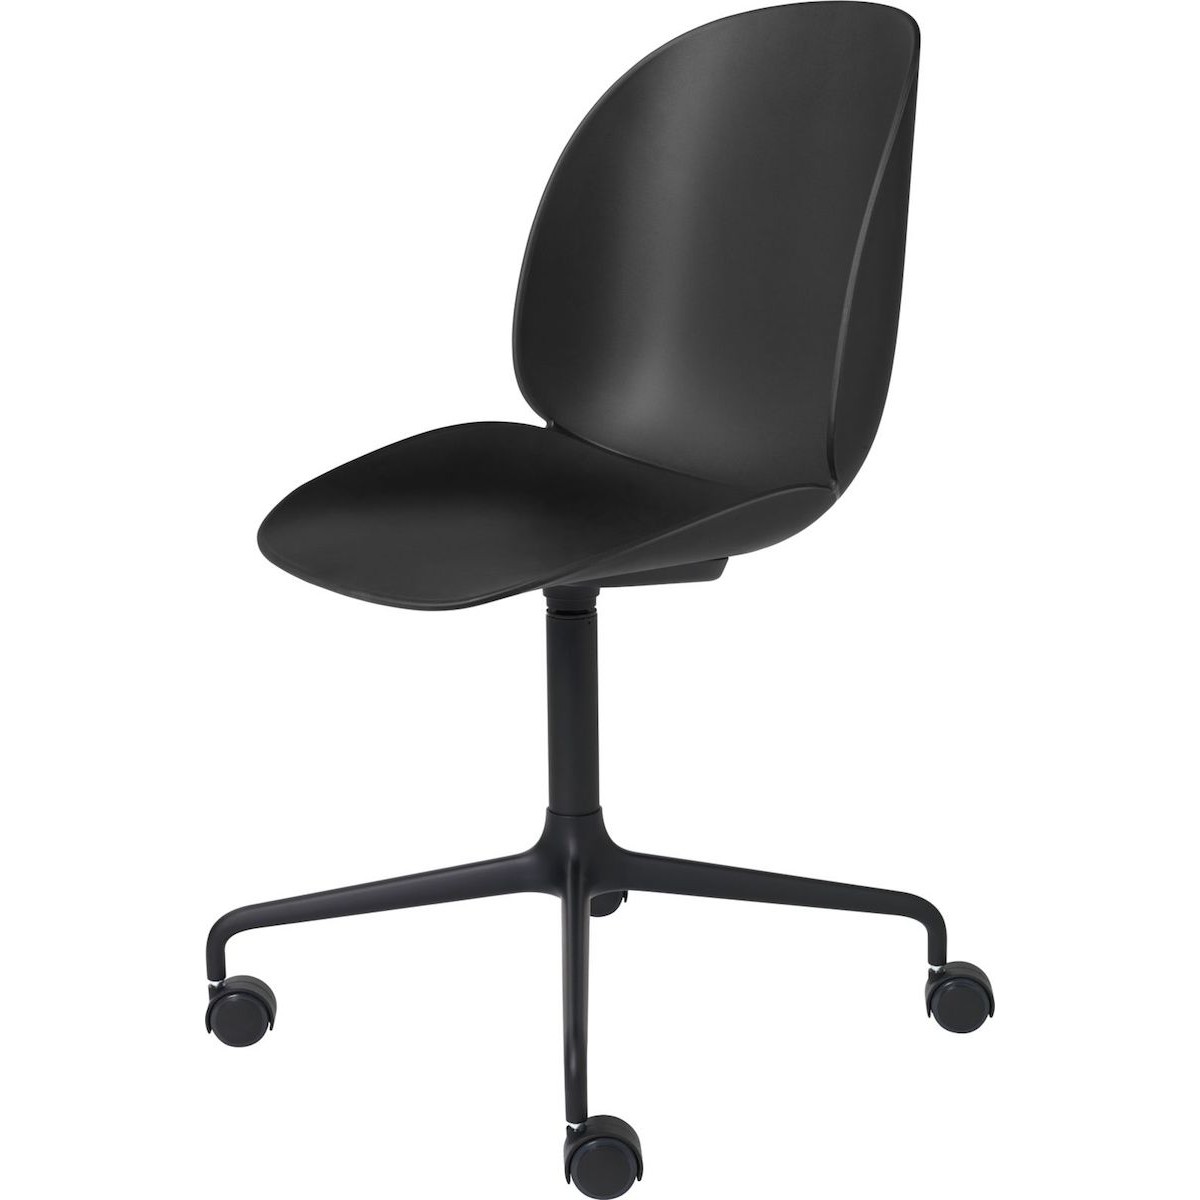 Beetle meeting chair 4-stars - black shell – with castors